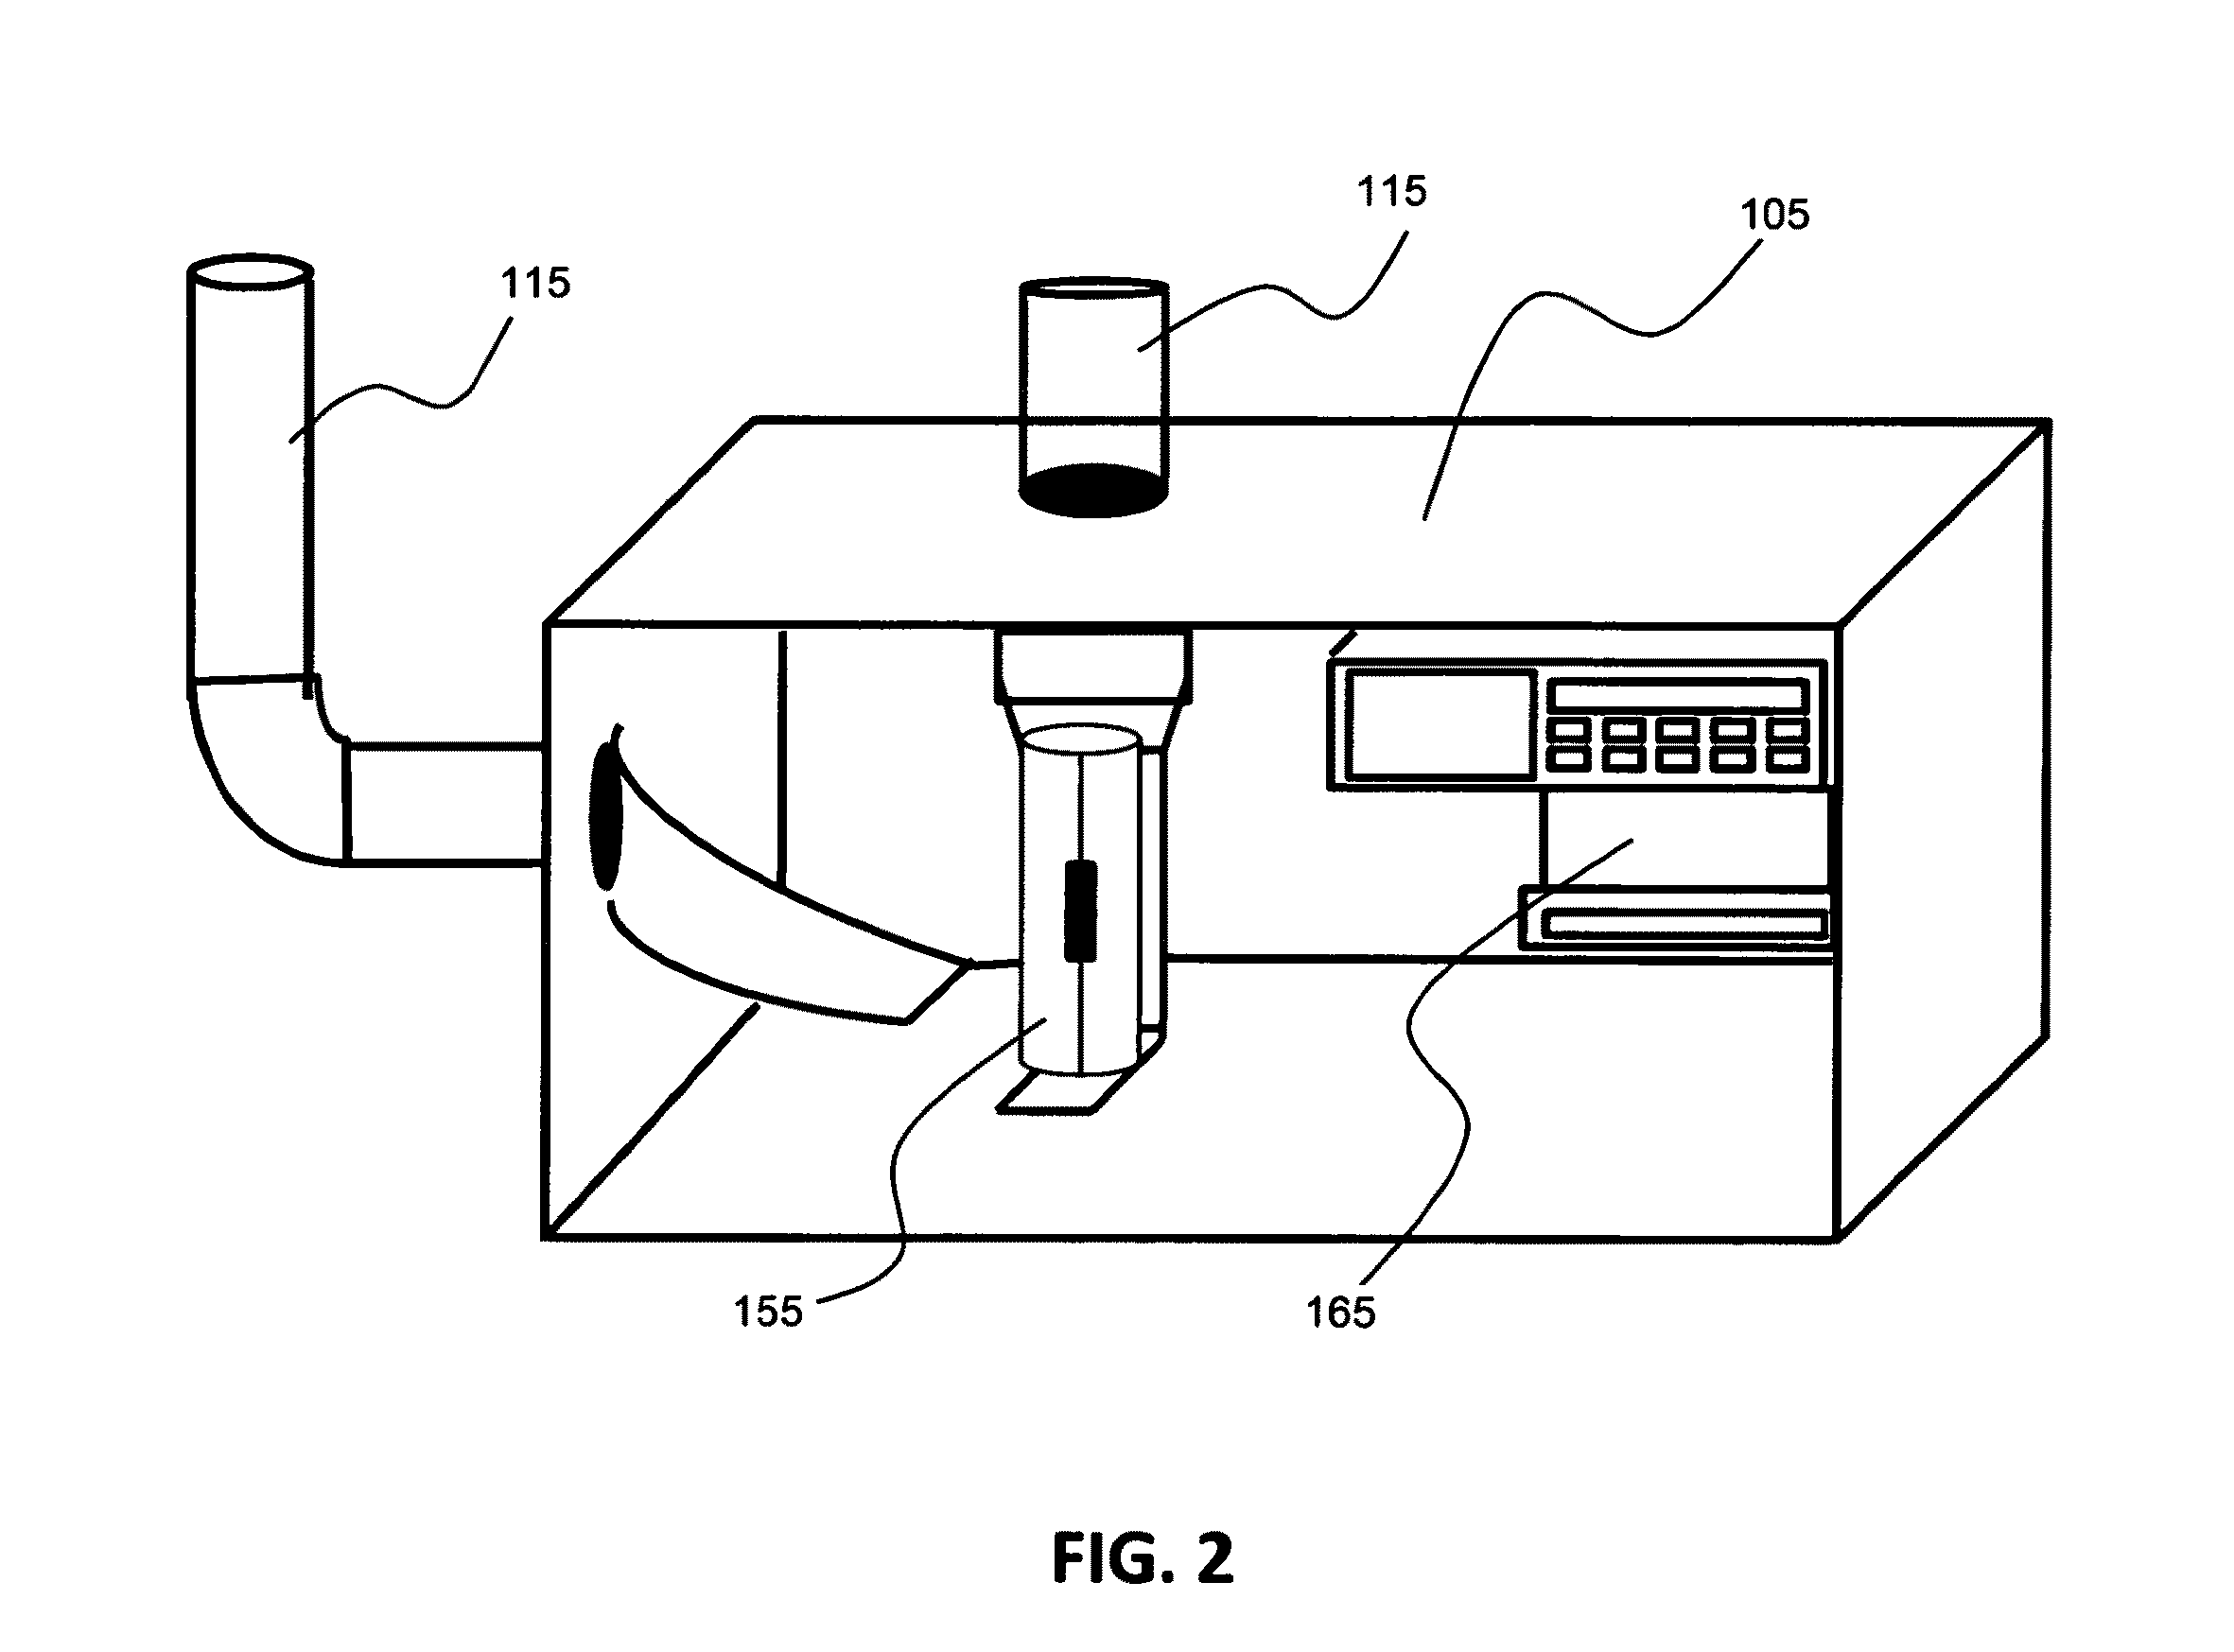 Method and system for sealing products in a pneumatic tube carrier